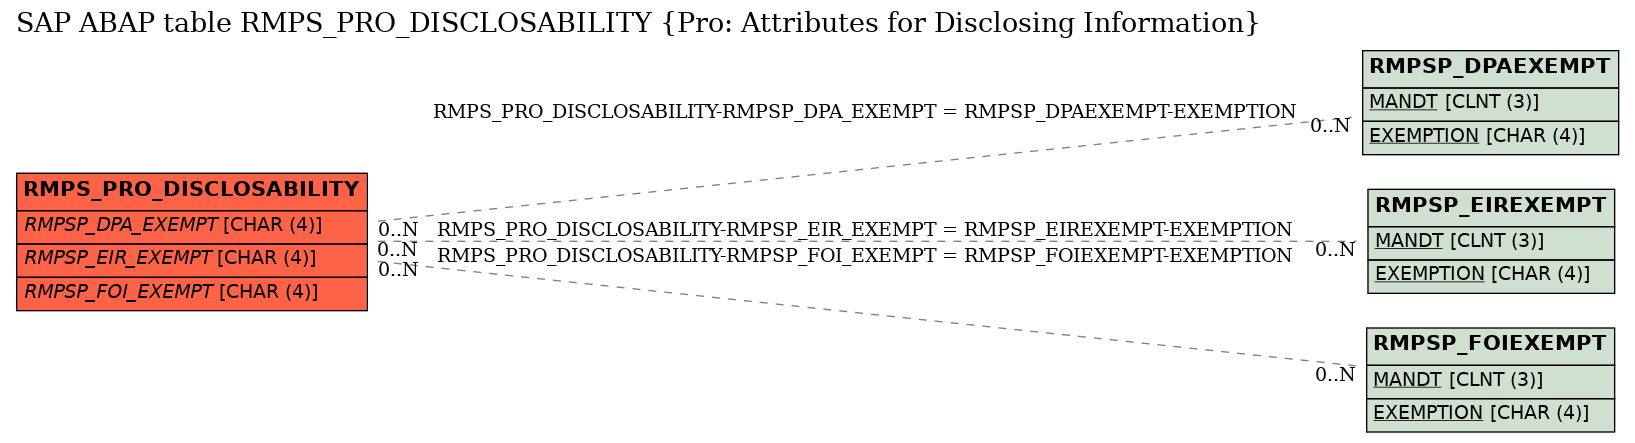 E-R Diagram for table RMPS_PRO_DISCLOSABILITY (Pro: Attributes for Disclosing Information)